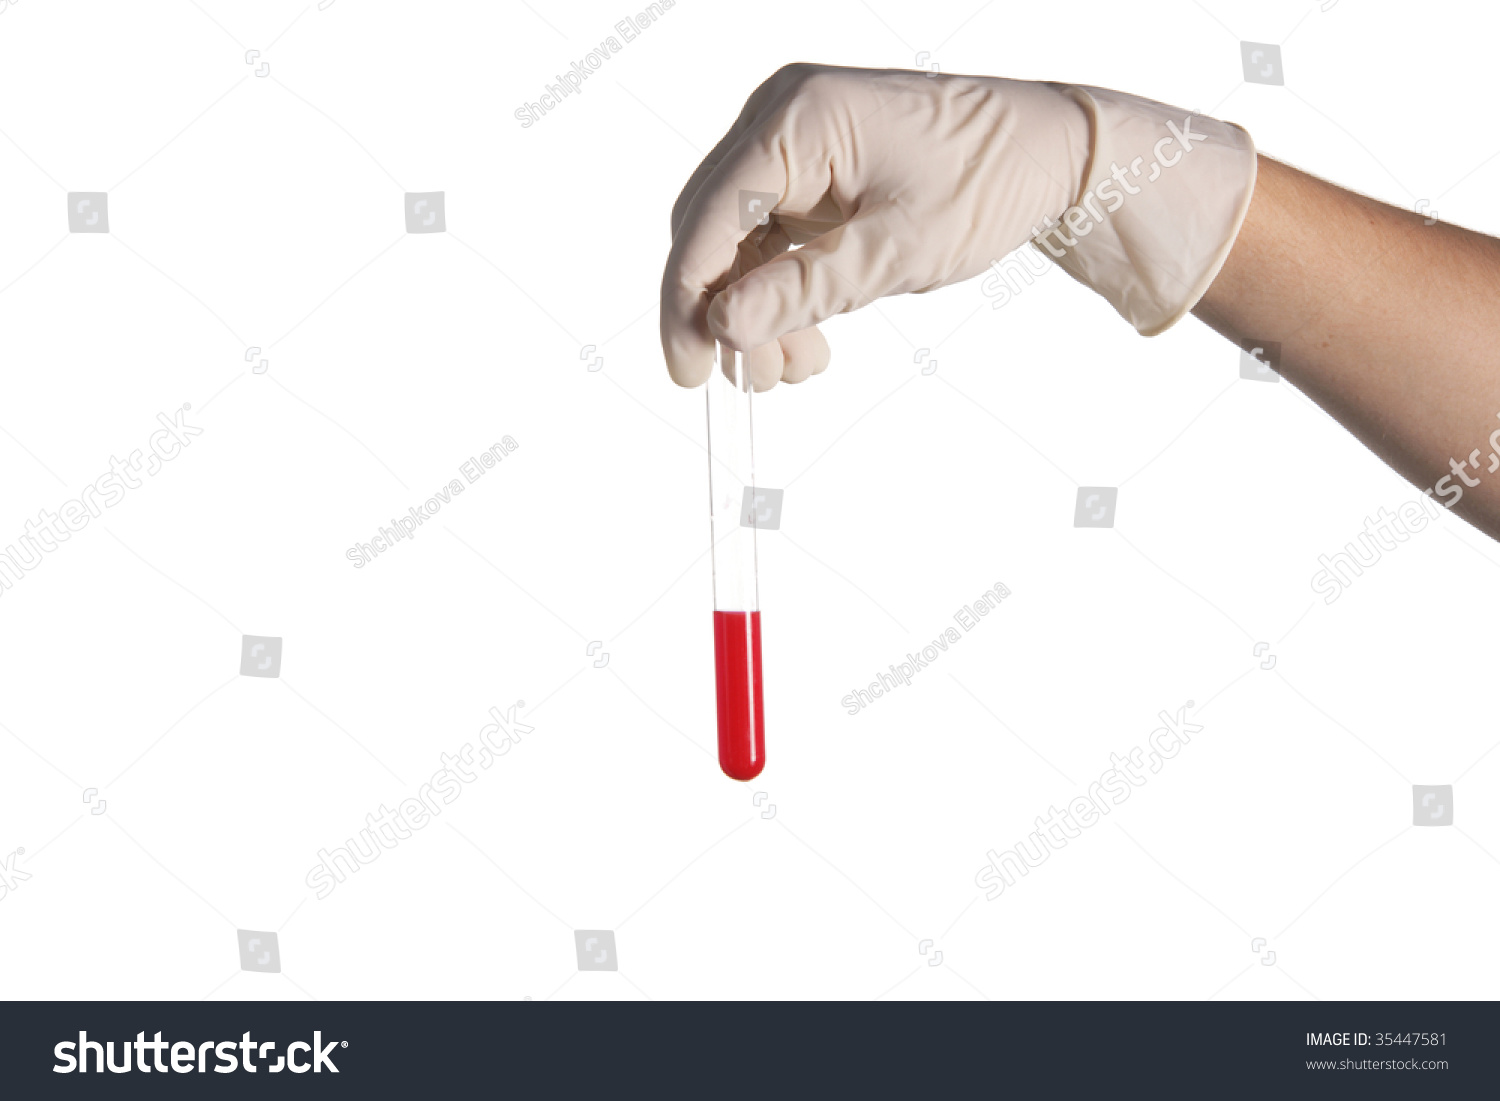 Hand In A Rubber Glove Holds A Test Tube With A Liquid Stock Photo